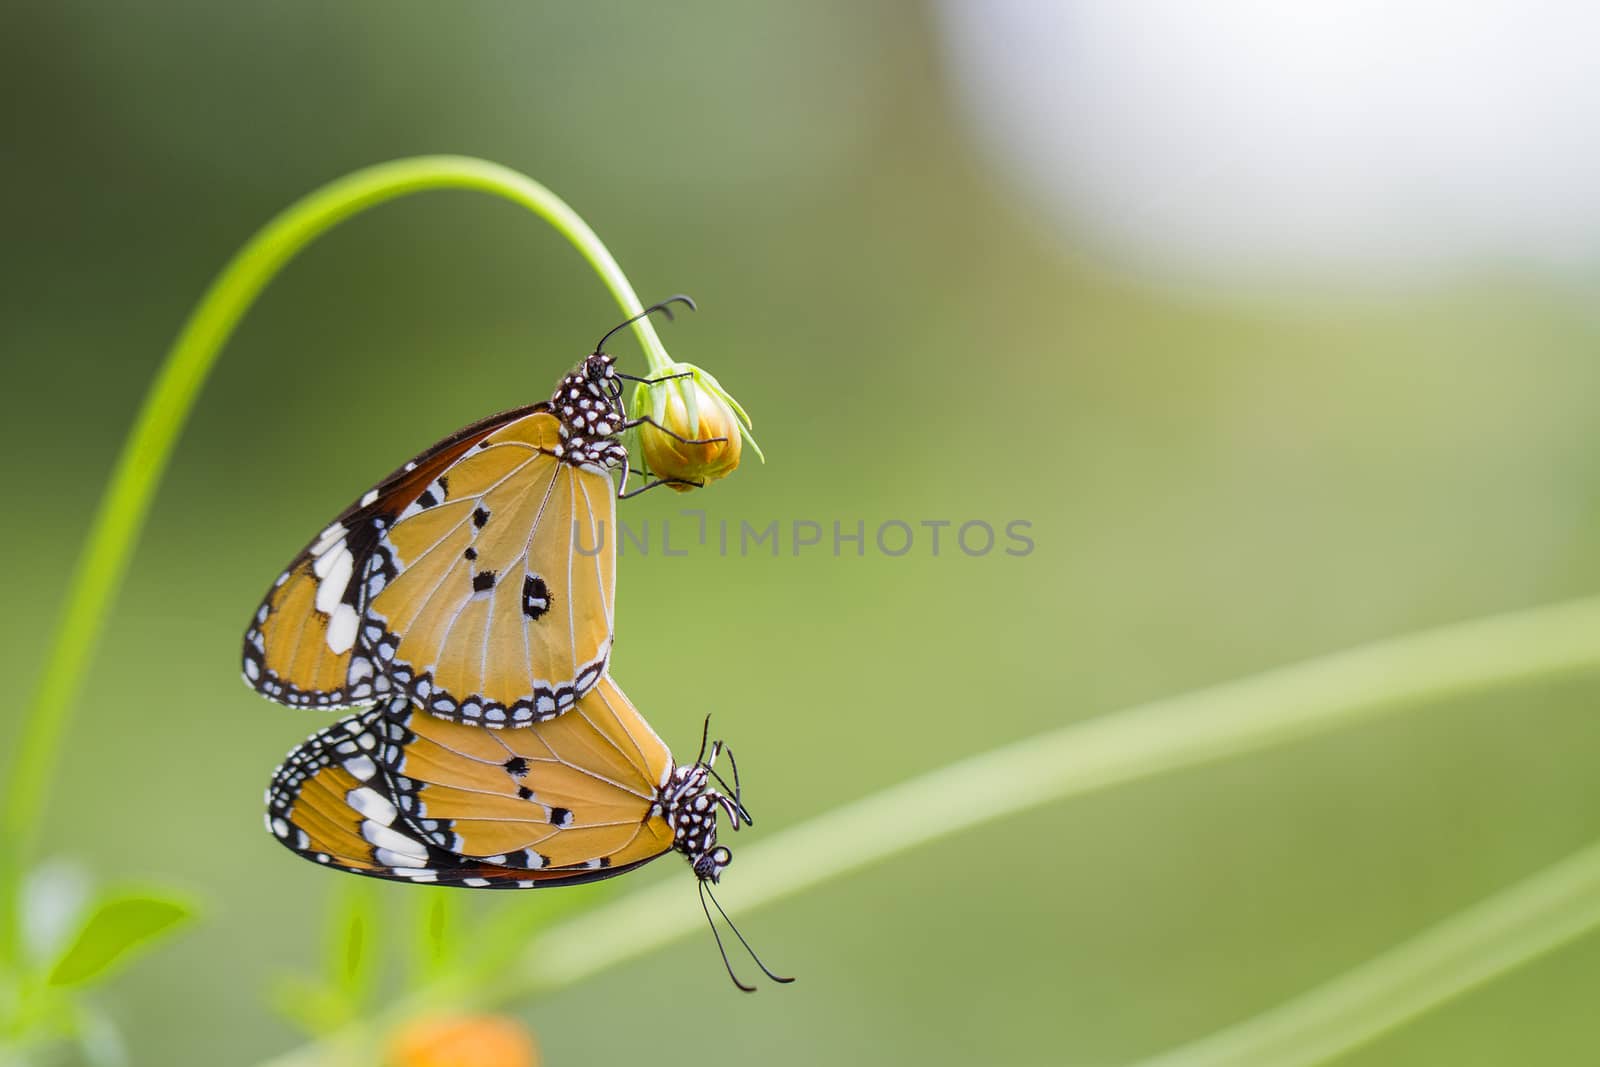 Butterfly mating on the flowers